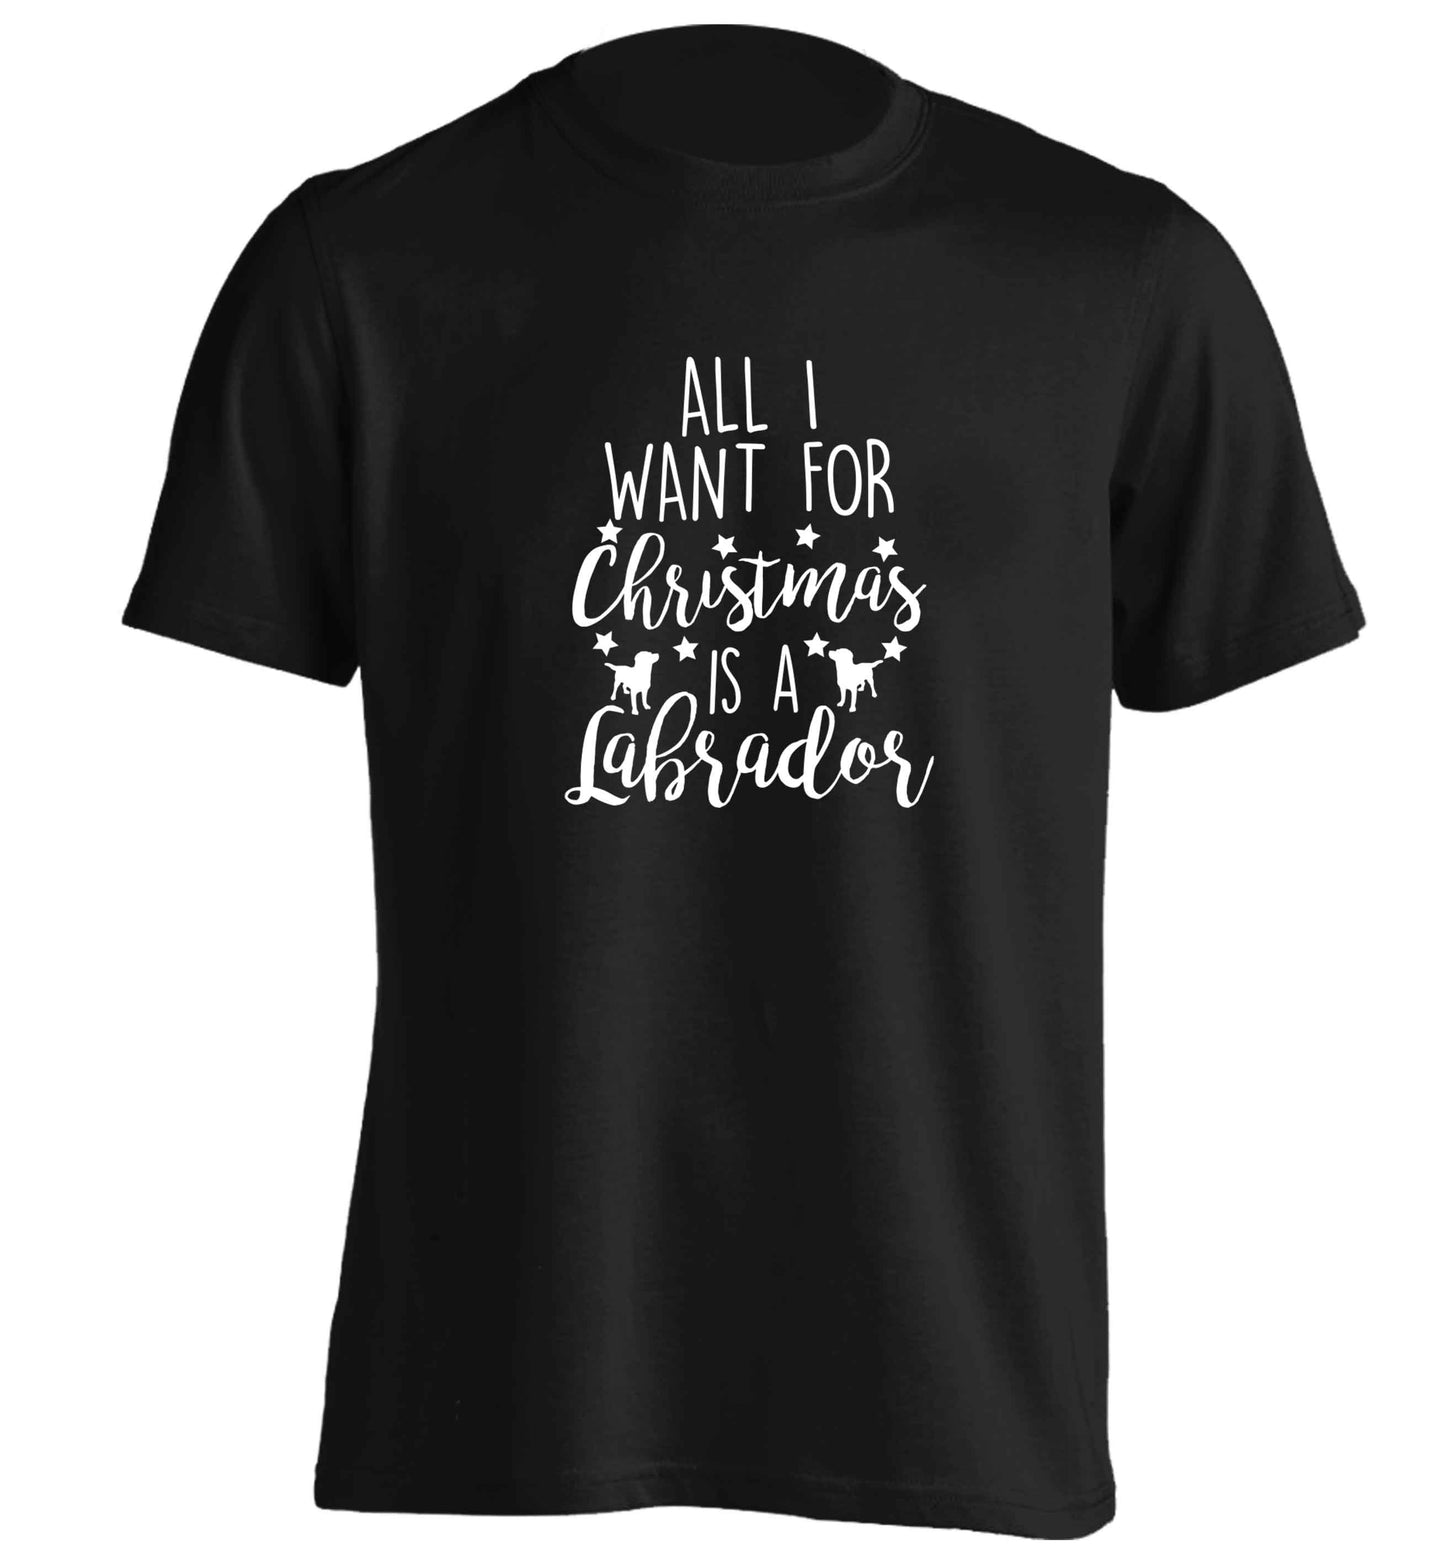 All I want for Christmas is a labrador adults unisex black Tshirt 2XL